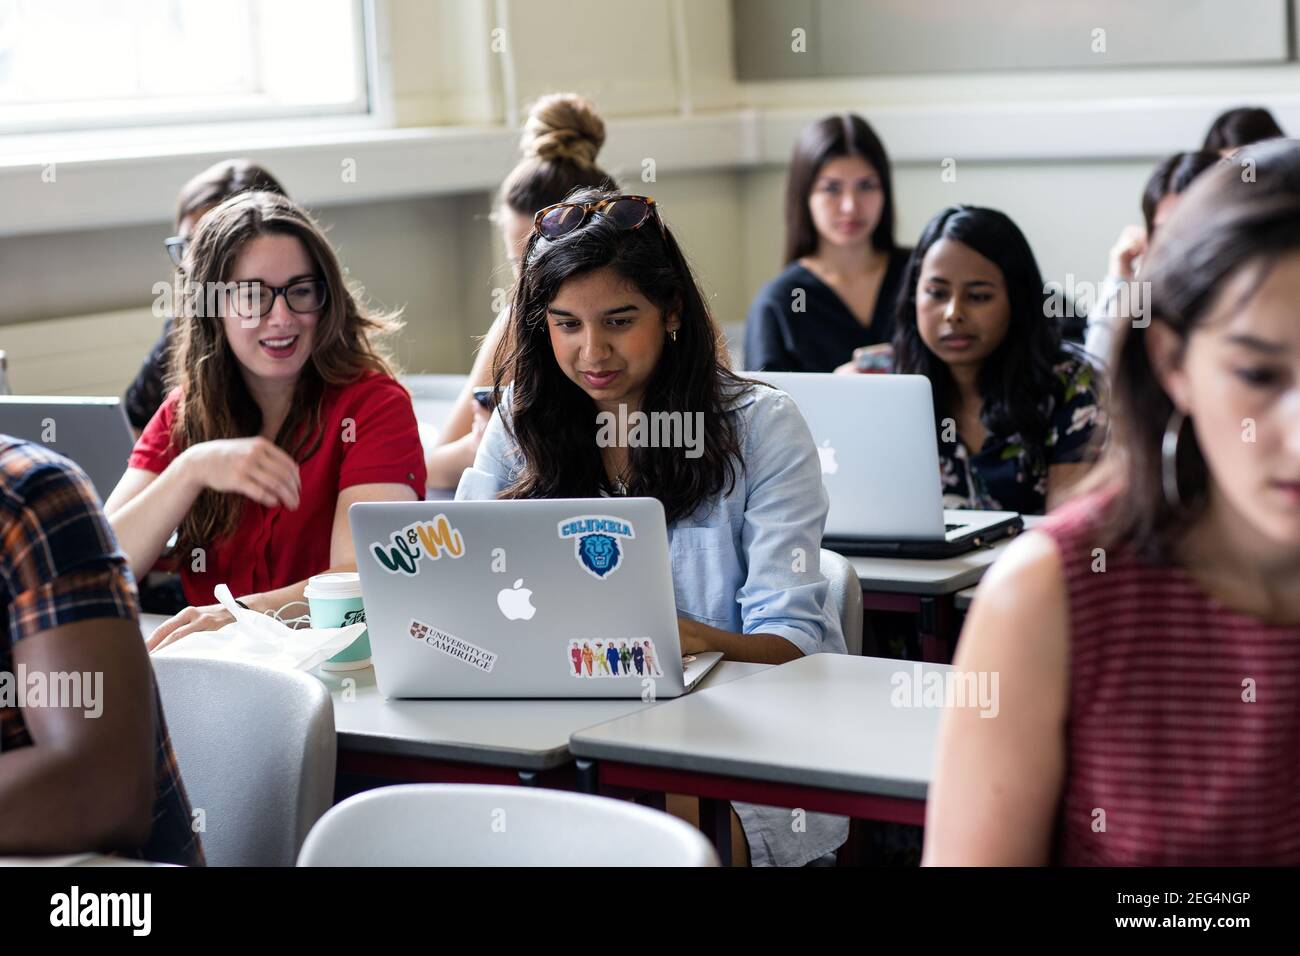 Female college students working on computer in classroom, young adults in further education. Stock Photo